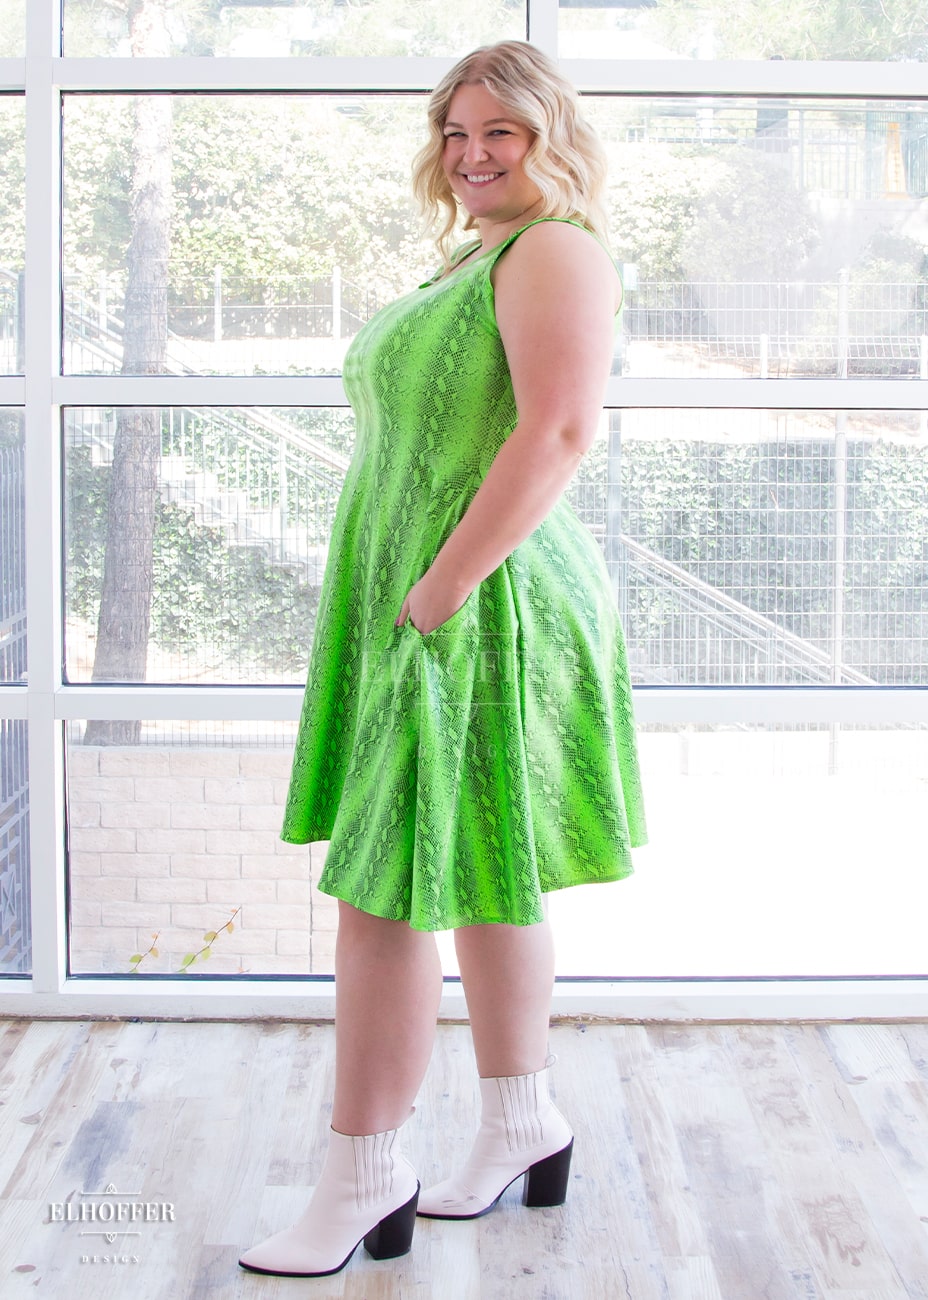 Sarah, a fair skinned size XL model with long blonde hair, wears a sleeveless knee length dress that is fitted in the torso and full in the skirt. The print is croki green, a lime green snake print. She faces to the side and has her hand in a generous pocket.